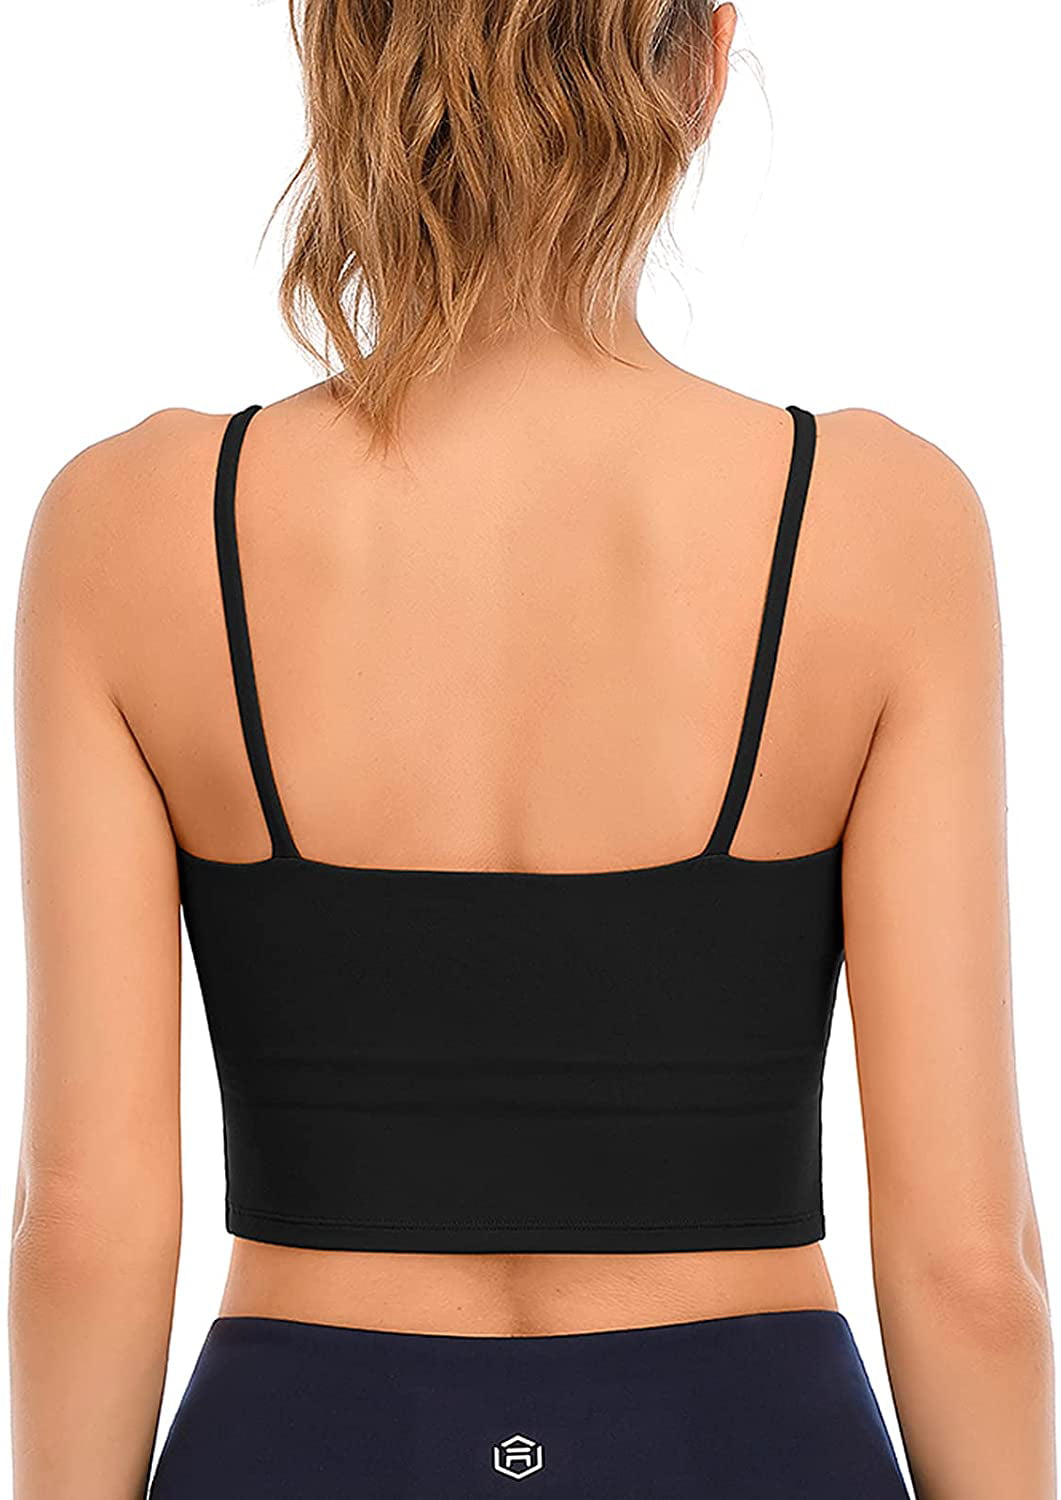 Melody Gold Leather Crop Top For Women Push Up Yoga Bra, Korset Dream Waist  Shaper, Gym, Sports Tank Top From Shascullfites, $14.47